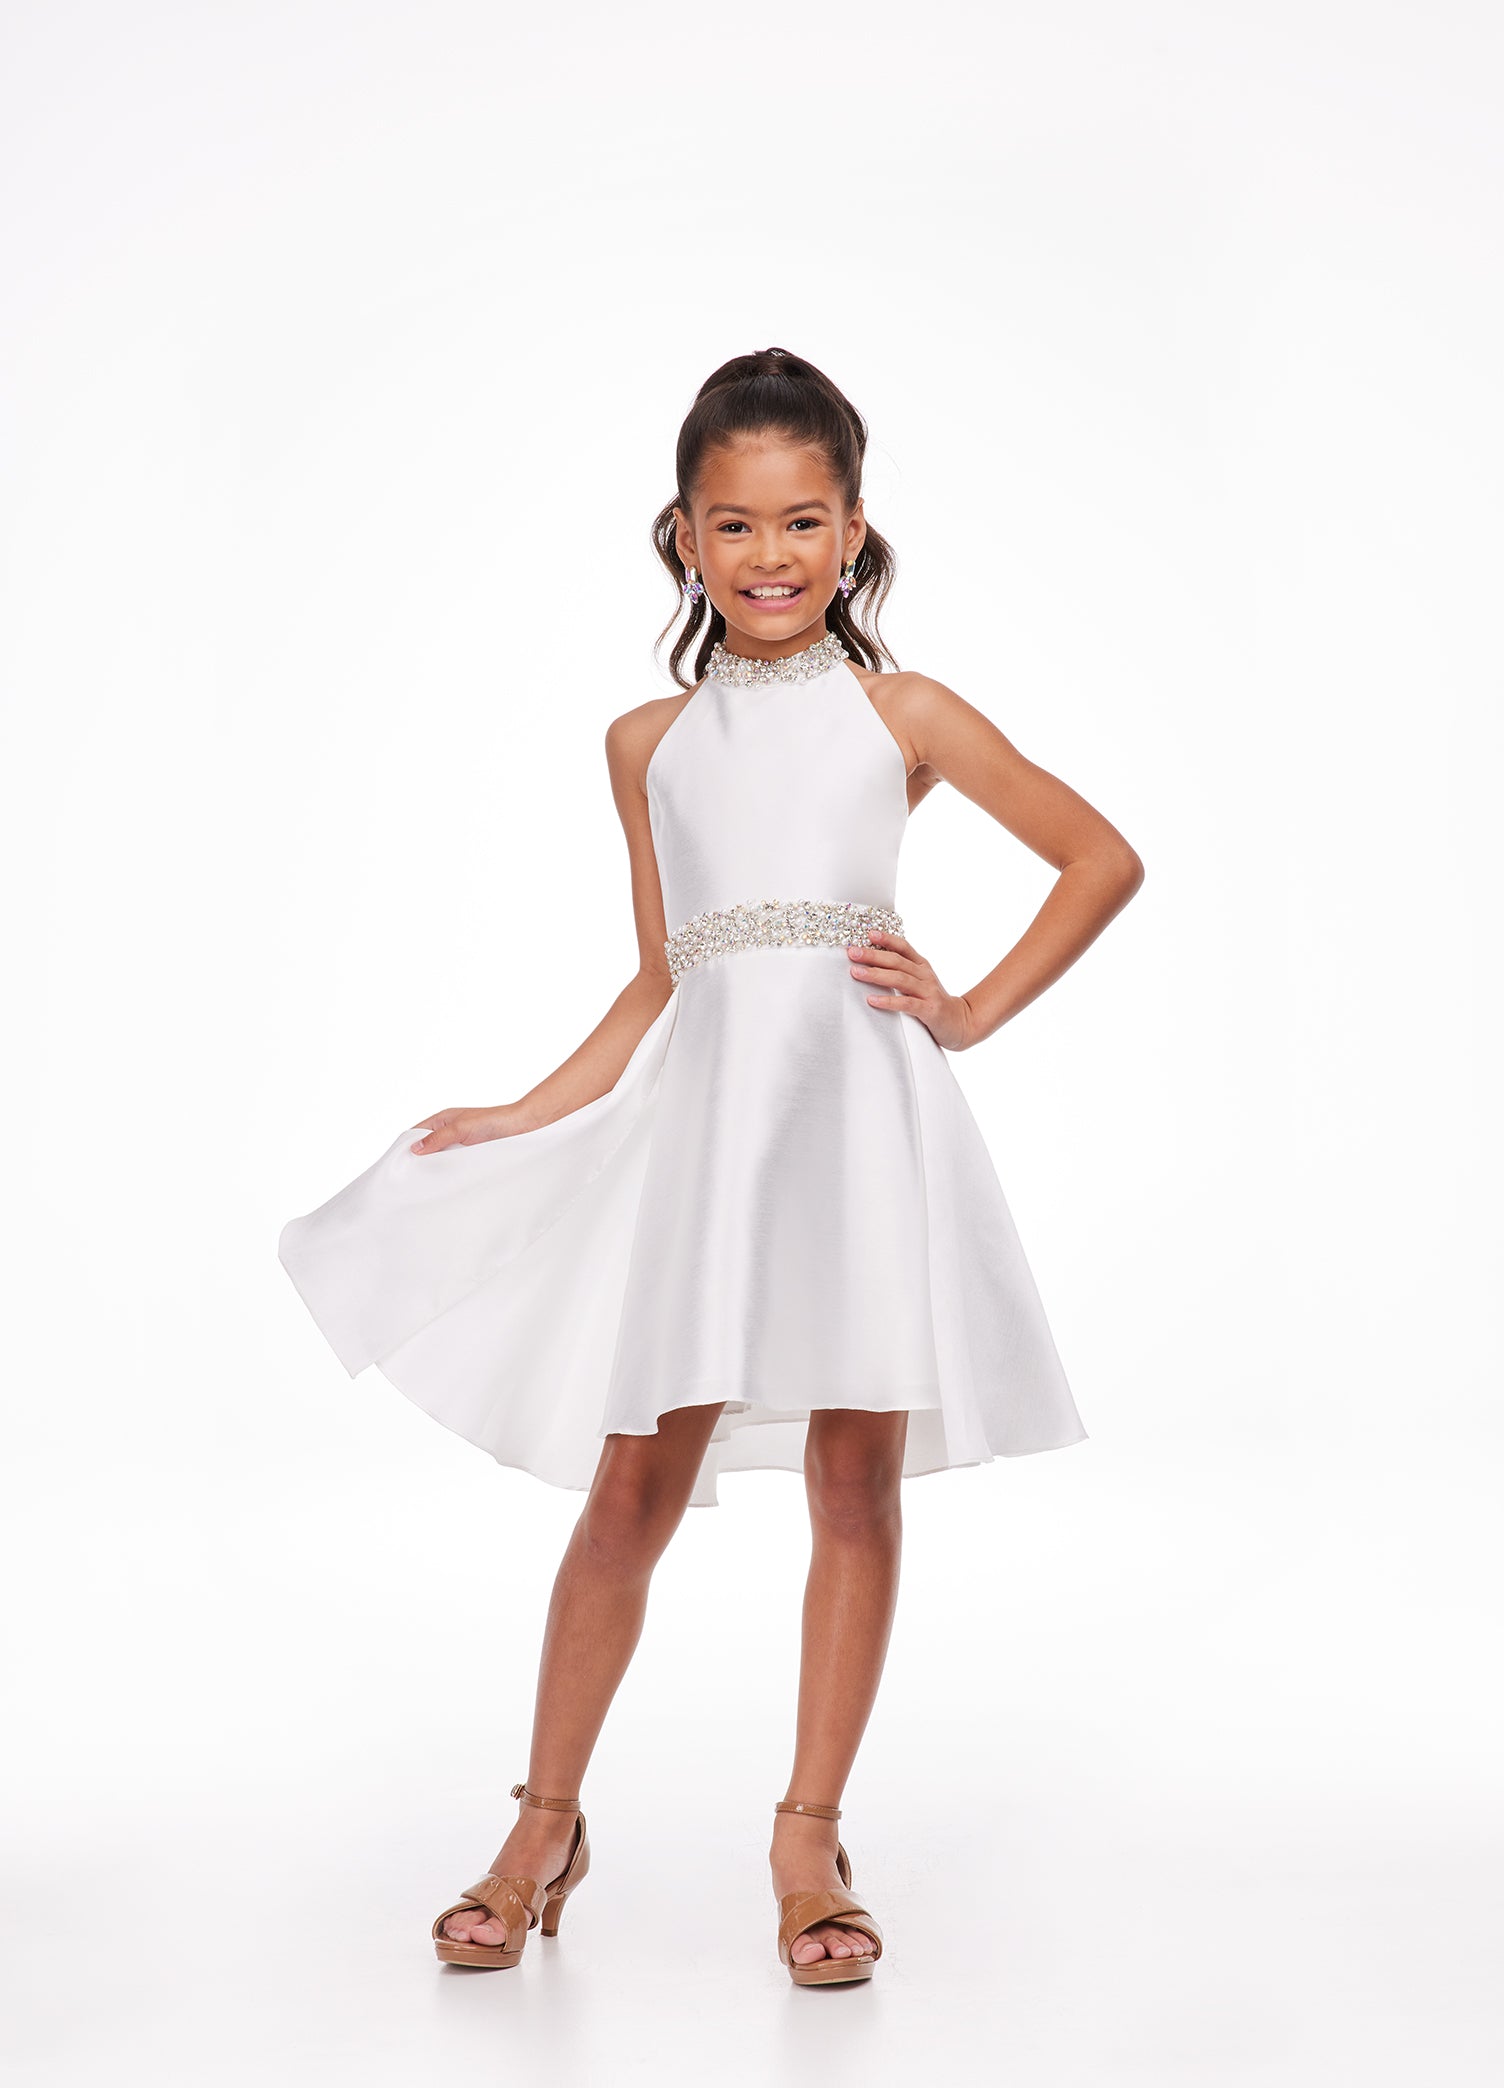 Ashley Lauren Kids 8103 Short Halter cocktail dress with overskirt Pageant Wear Stunning kids mikado cocktail dress featuring a crystal and pearl neckline and waist. The slight a-line skirt is completed with an overskirt for extra flare. Halter Neckline Crystal Beaded Neck & Belt A-Line Skirt Overlay Available Sizes: 4-16 Available Colors: Sky, White, Yellow, Orchid